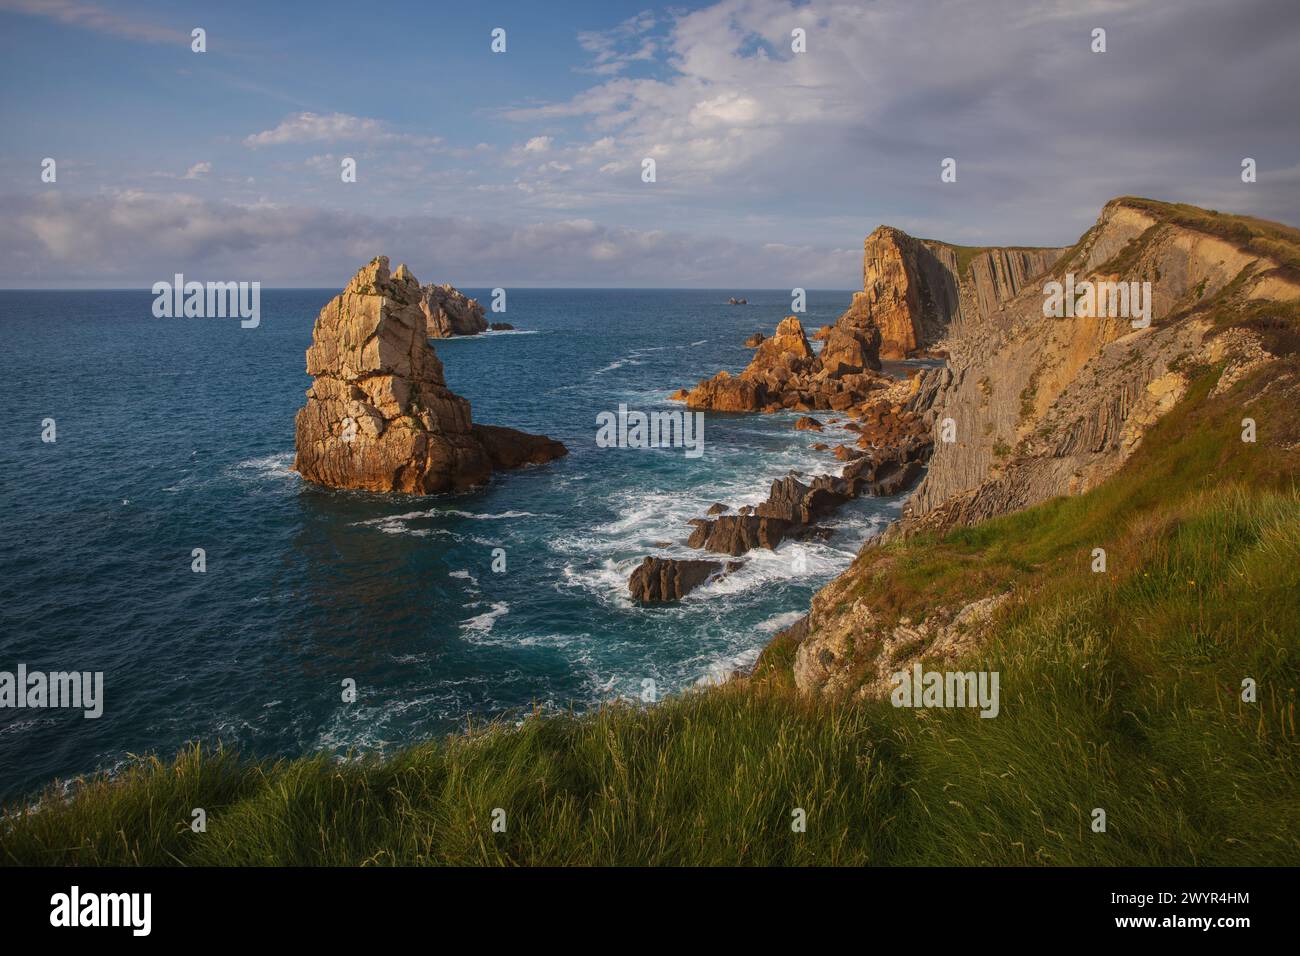 Sunset over Geological formations in Costa Quebrada Stock Photo